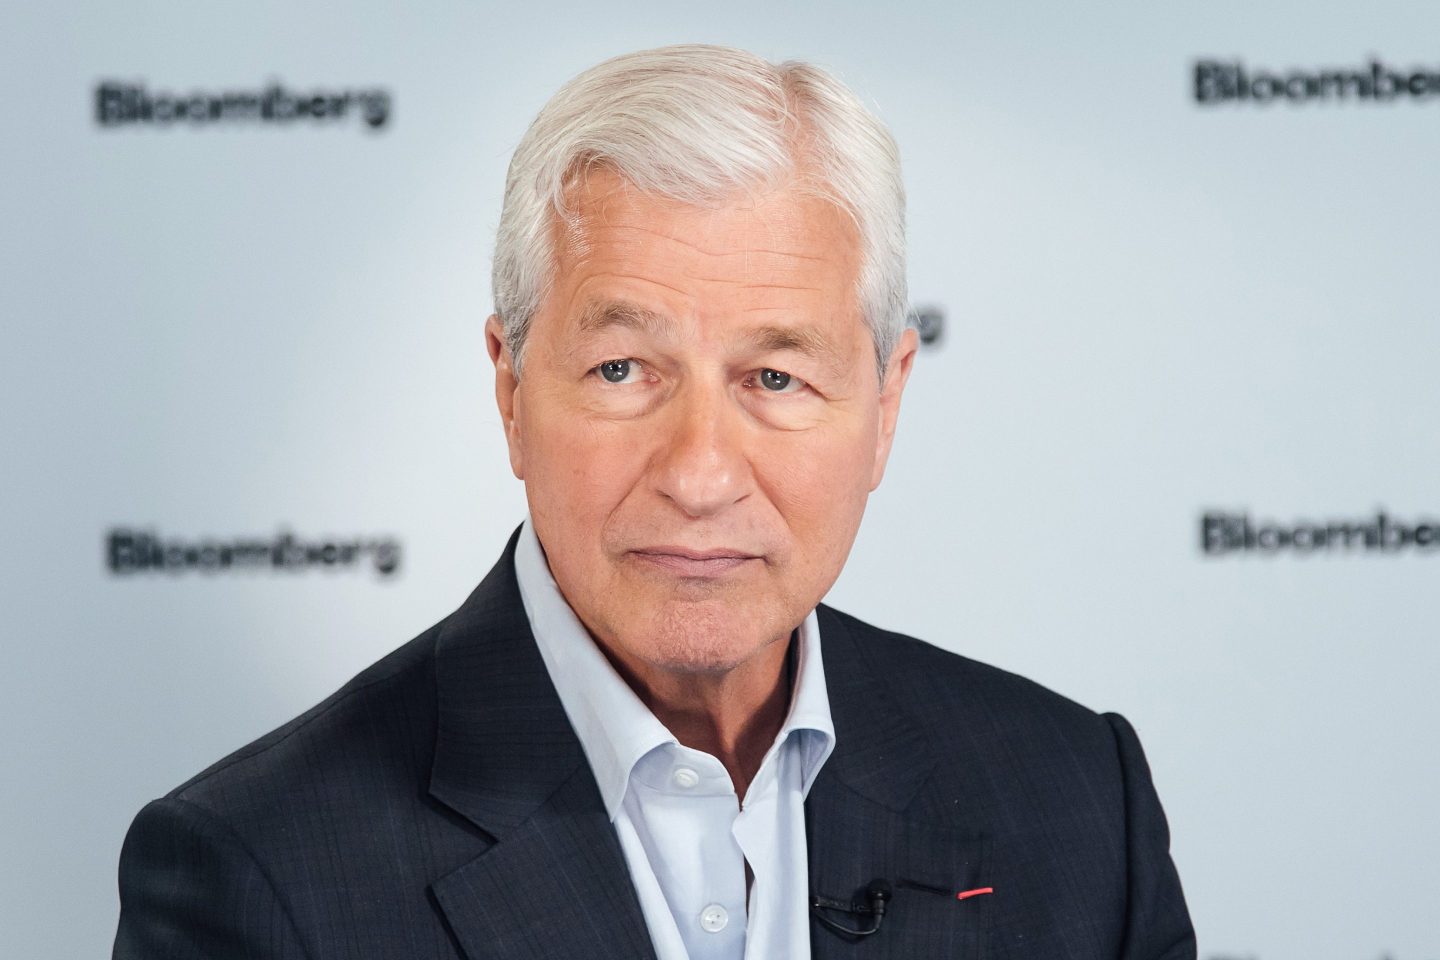 Jamie Dimon, chief executive officer of JPMorgan Chase & Co., during a Bloomberg Television interview at the JPMorgan Global Markets Conference in Paris, France, on Thursday, May 11, 2023.